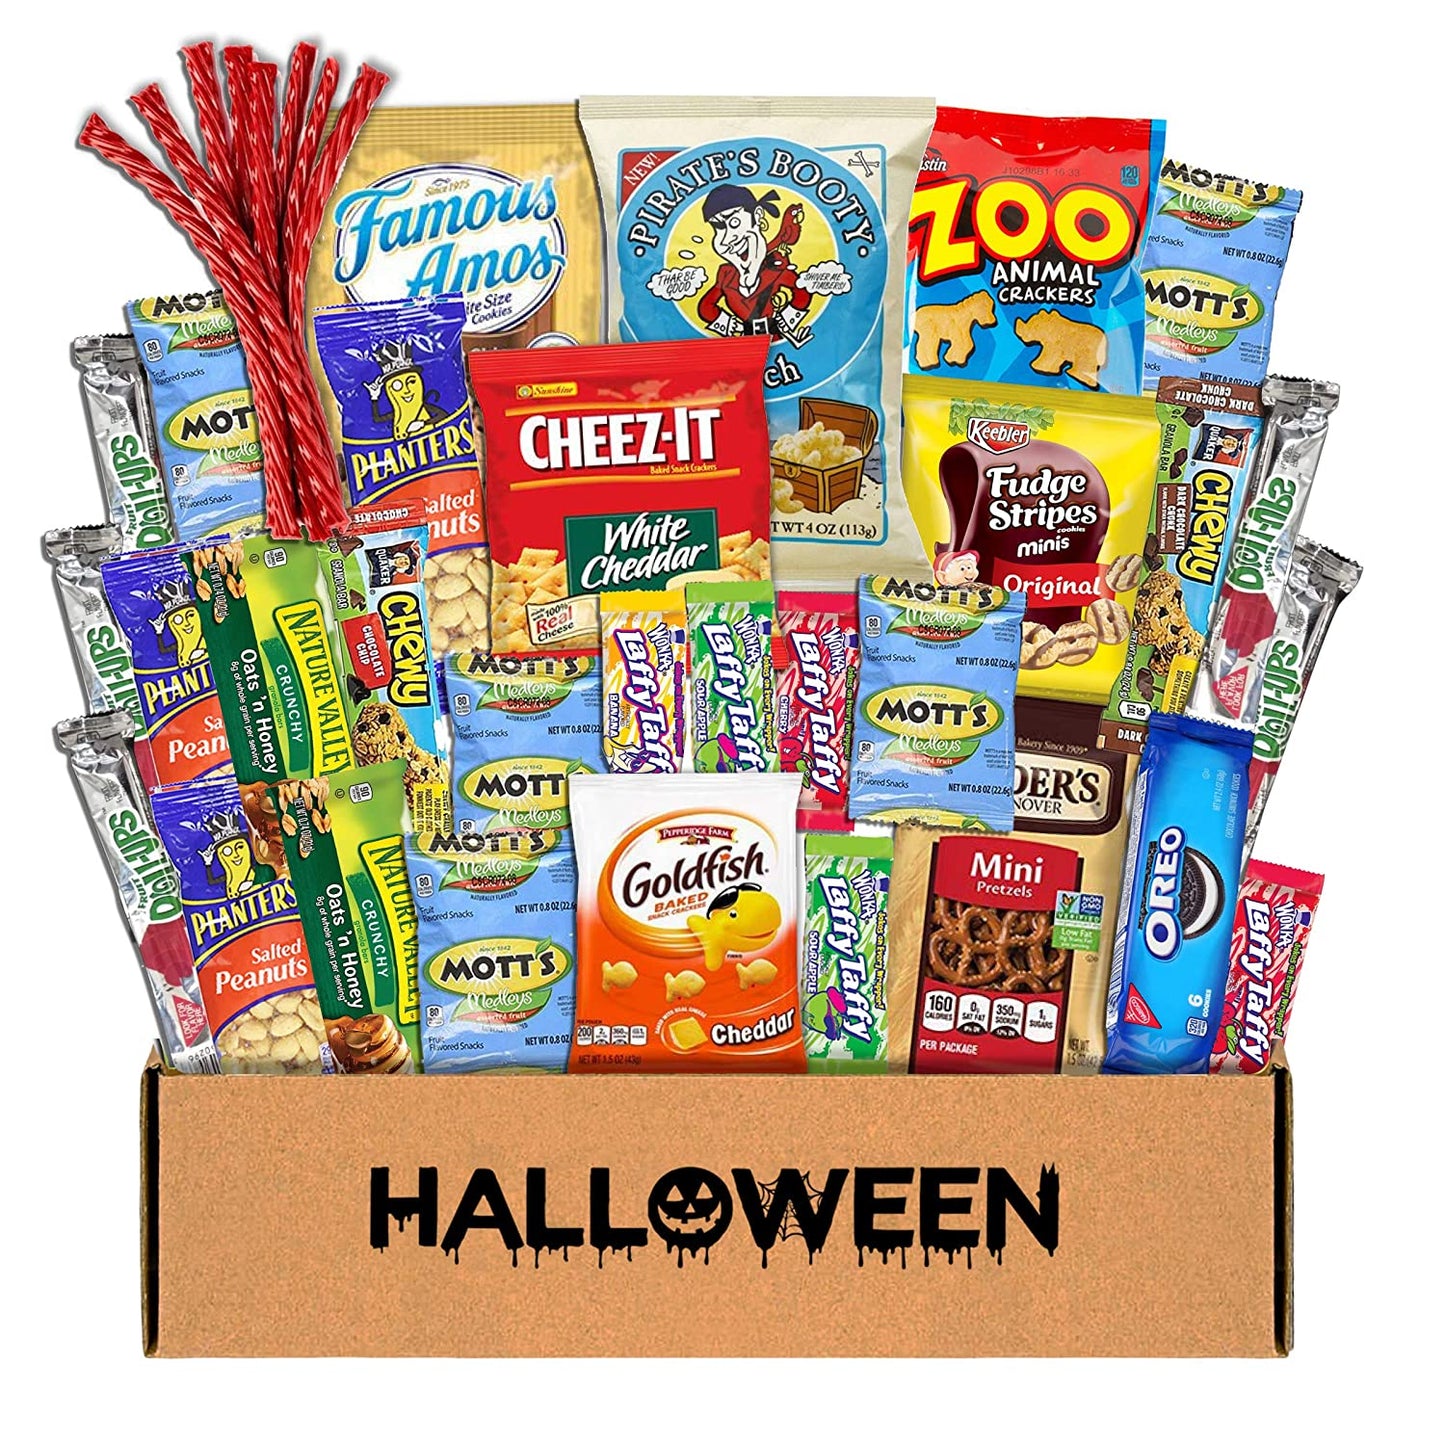 Halloween Package (38) Candy Snacks Assortment Trick or Treat Cookies Food Bars Toys Variety Gift Pack Box Bundle Mixed Bulk Sampler for Children Kids Boys Girls College Students